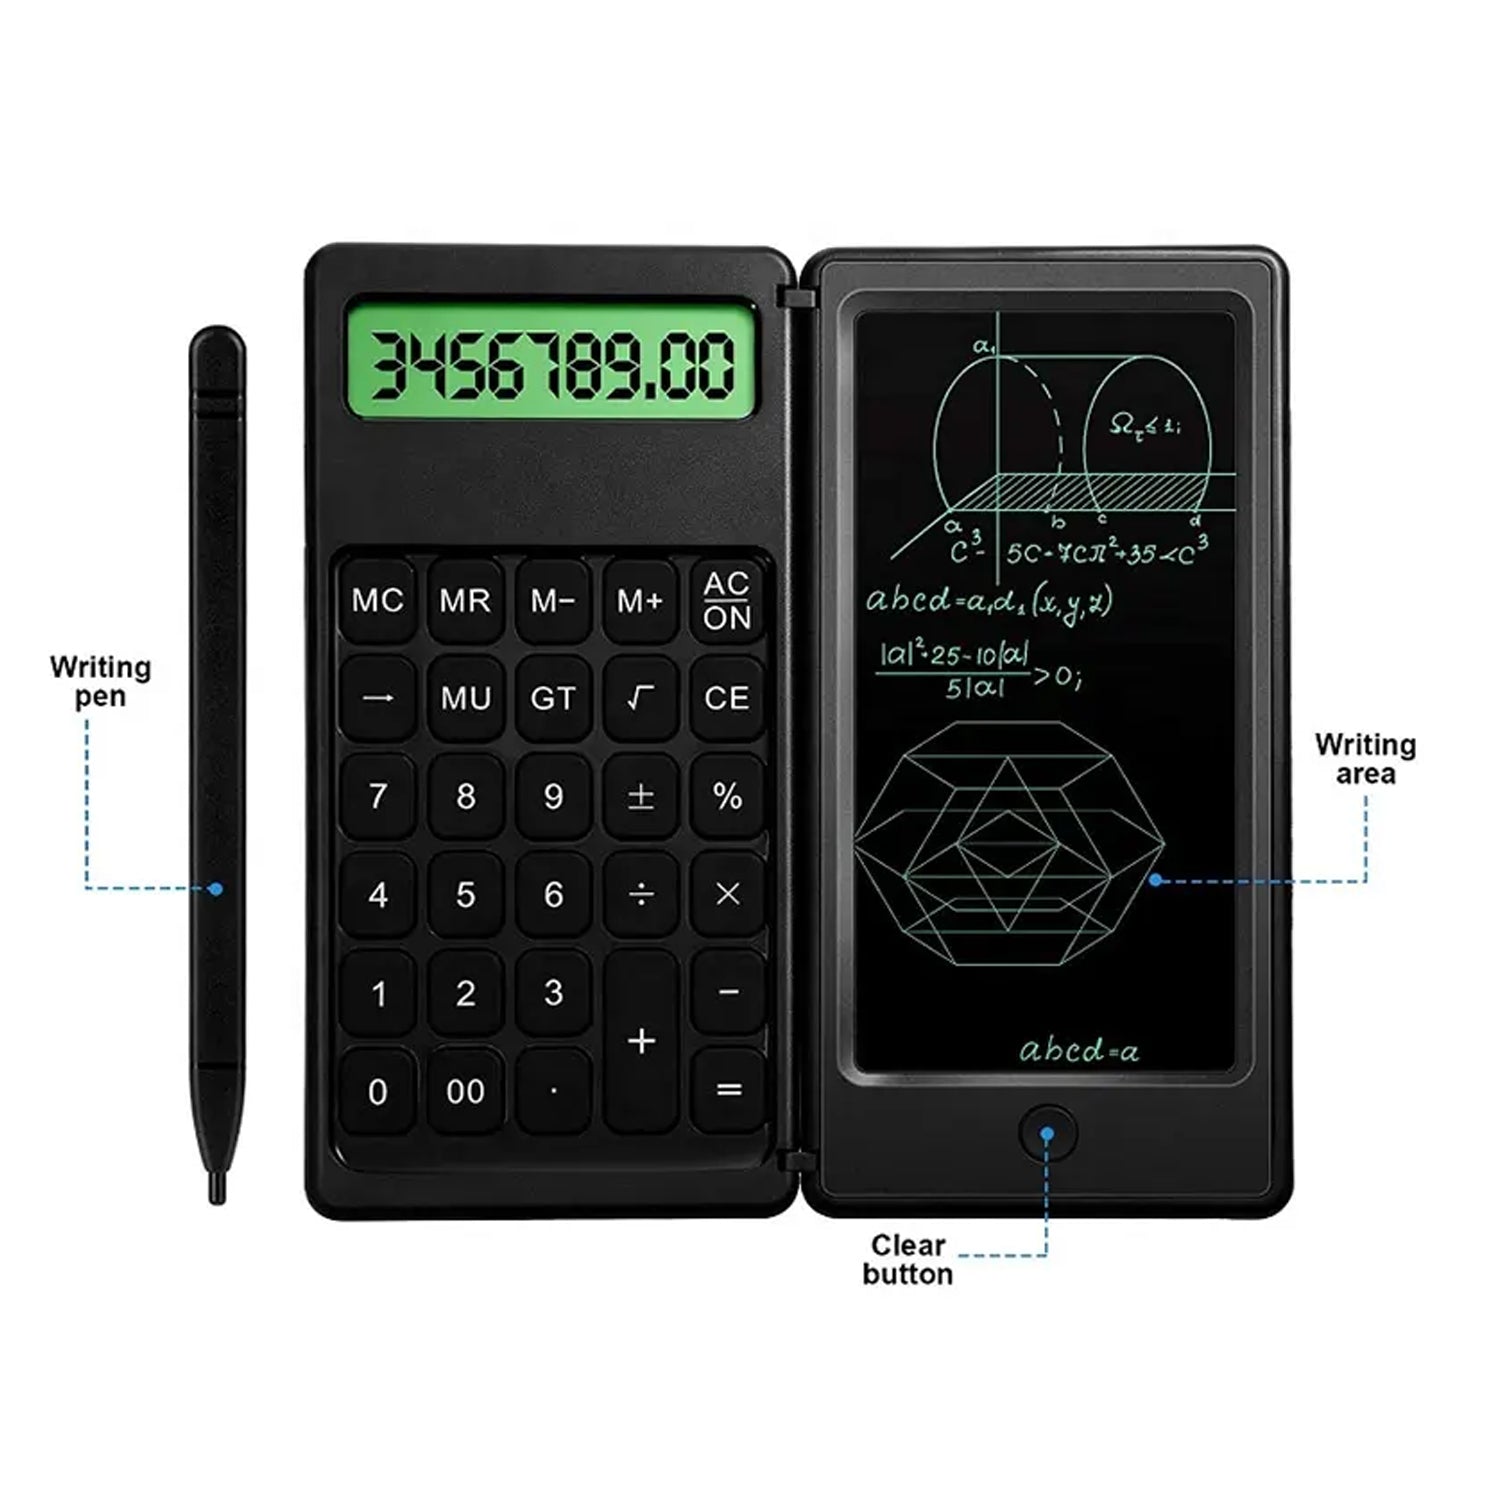 6739 Foldable Calculator With 6 Inch LCD Tablet Digital Drawing Pad Stylus Pen Erase Button Lock Function Smart Calculator   -01